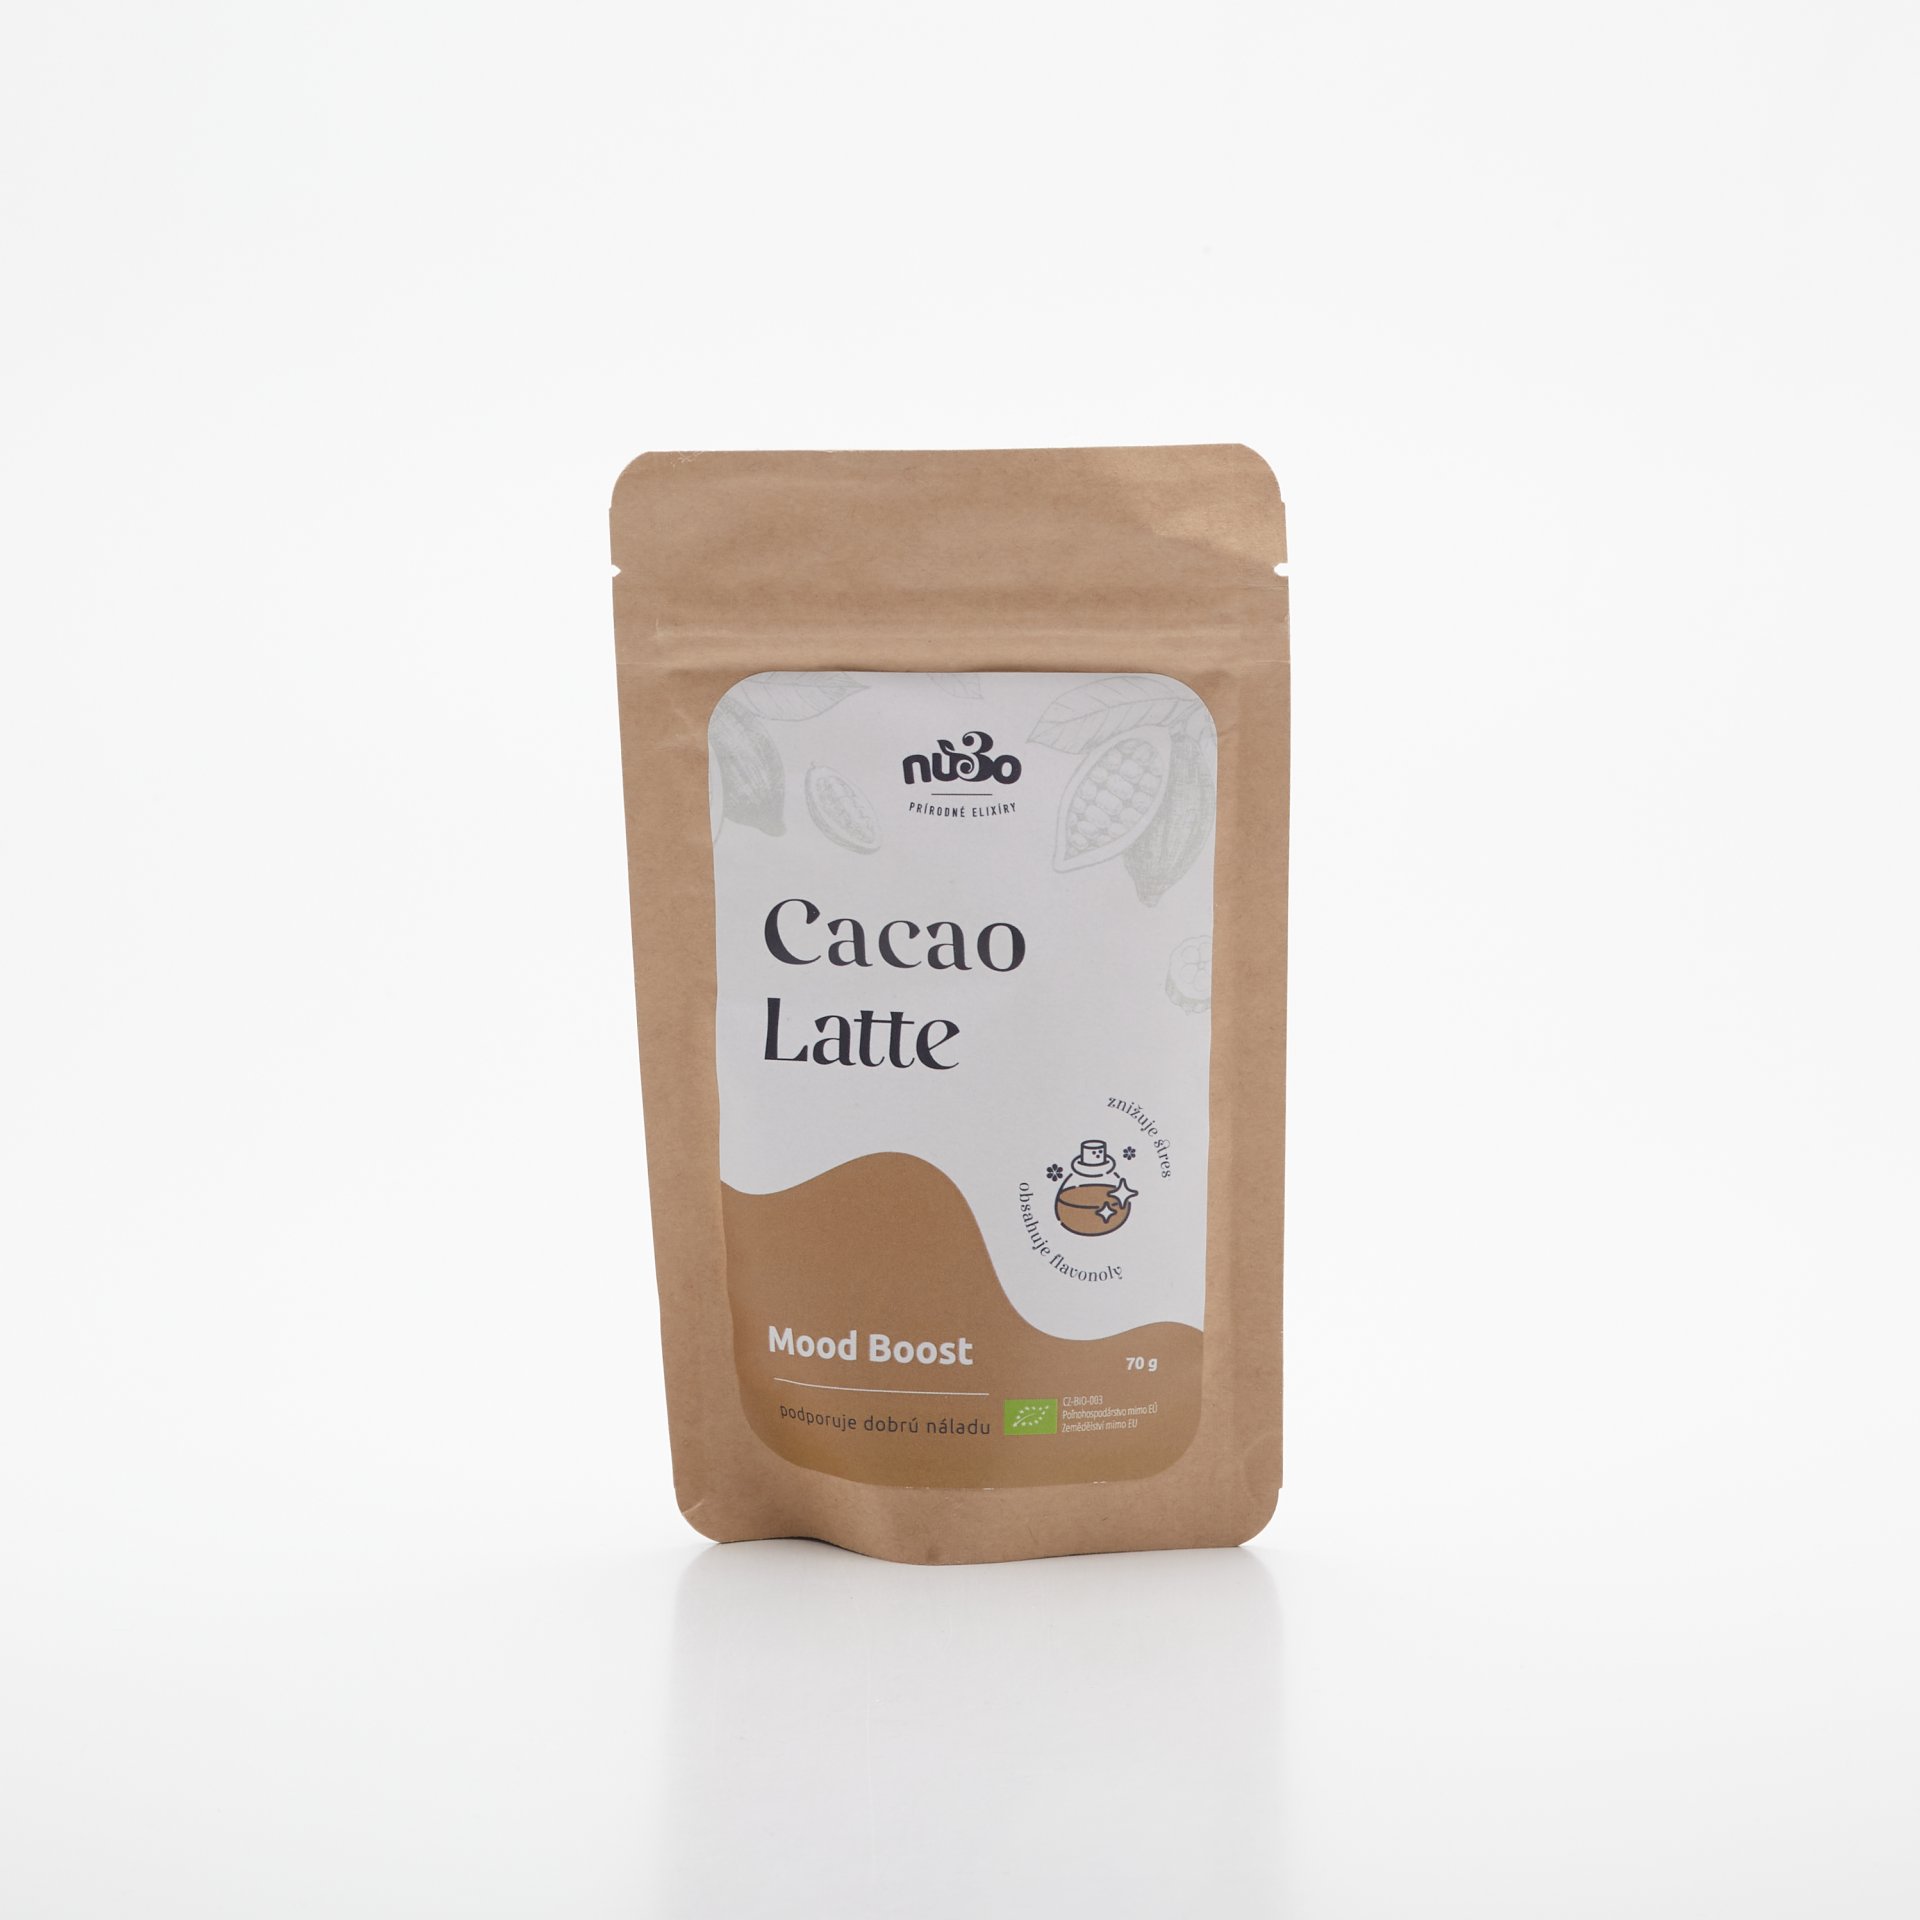 Cacao latte 70g